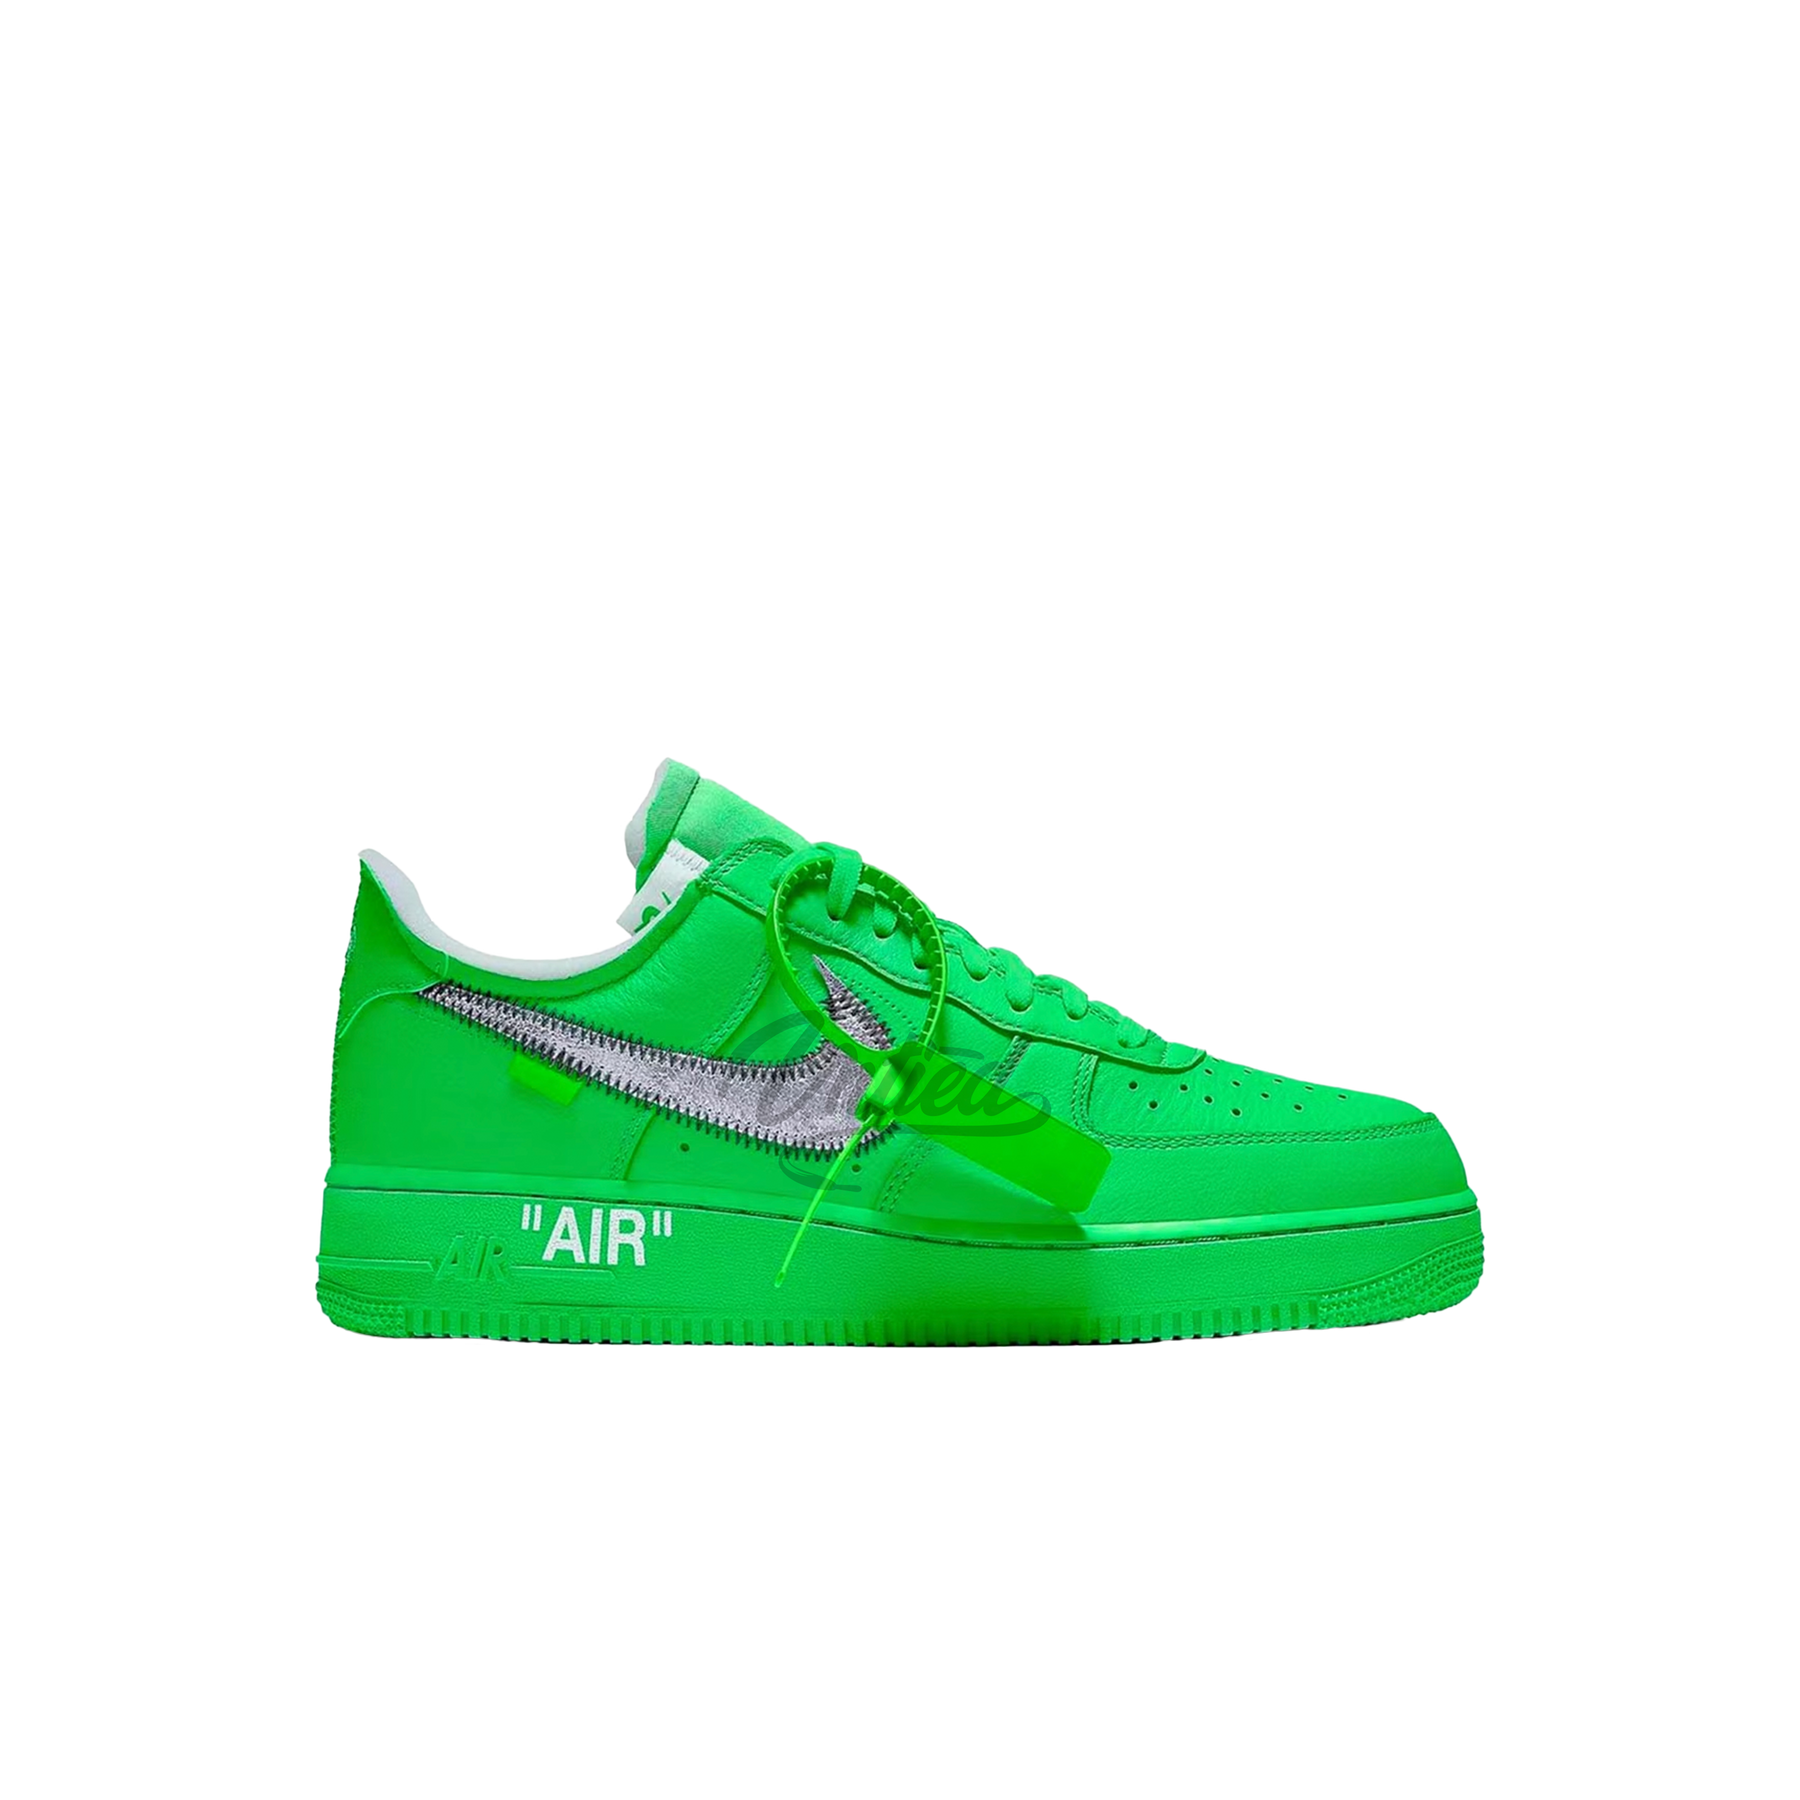 Off-White Nike Air Force 1 Low Light Green Spark